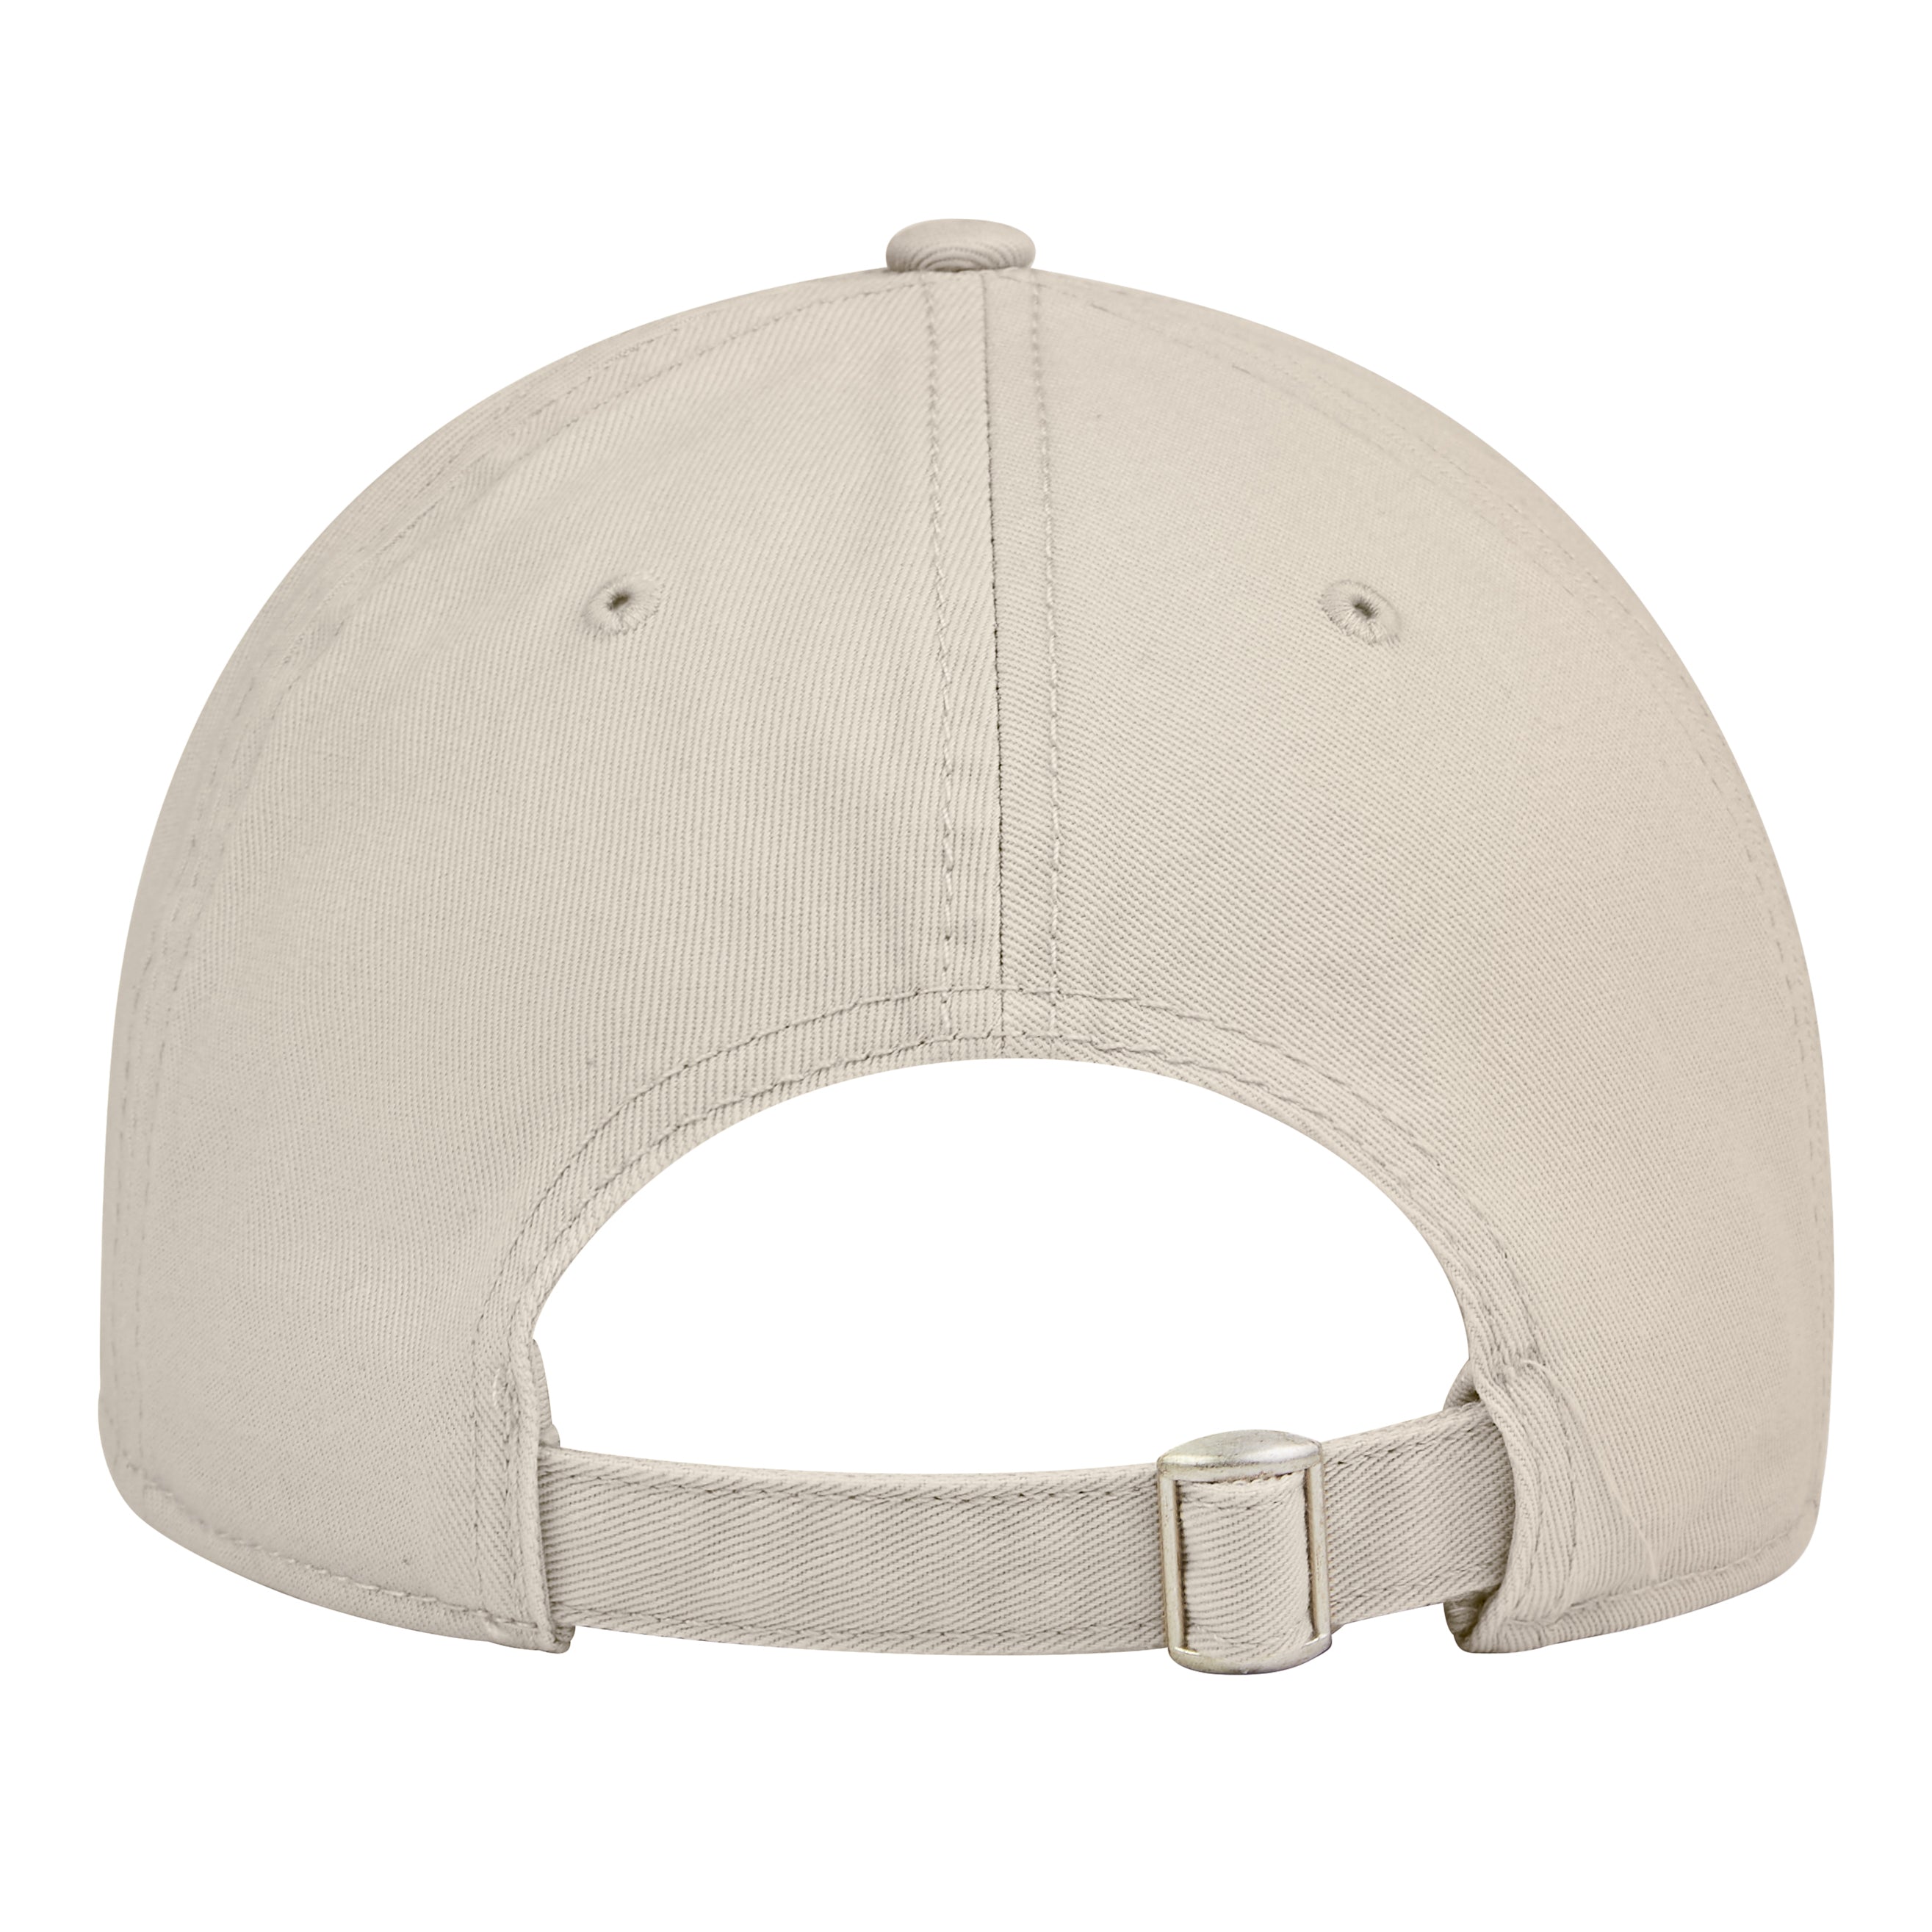 This is the back of the new standard 3d distressed 5 panel in stone. It's a large image of the rear of the hat showing the buckle and the strap on a white background